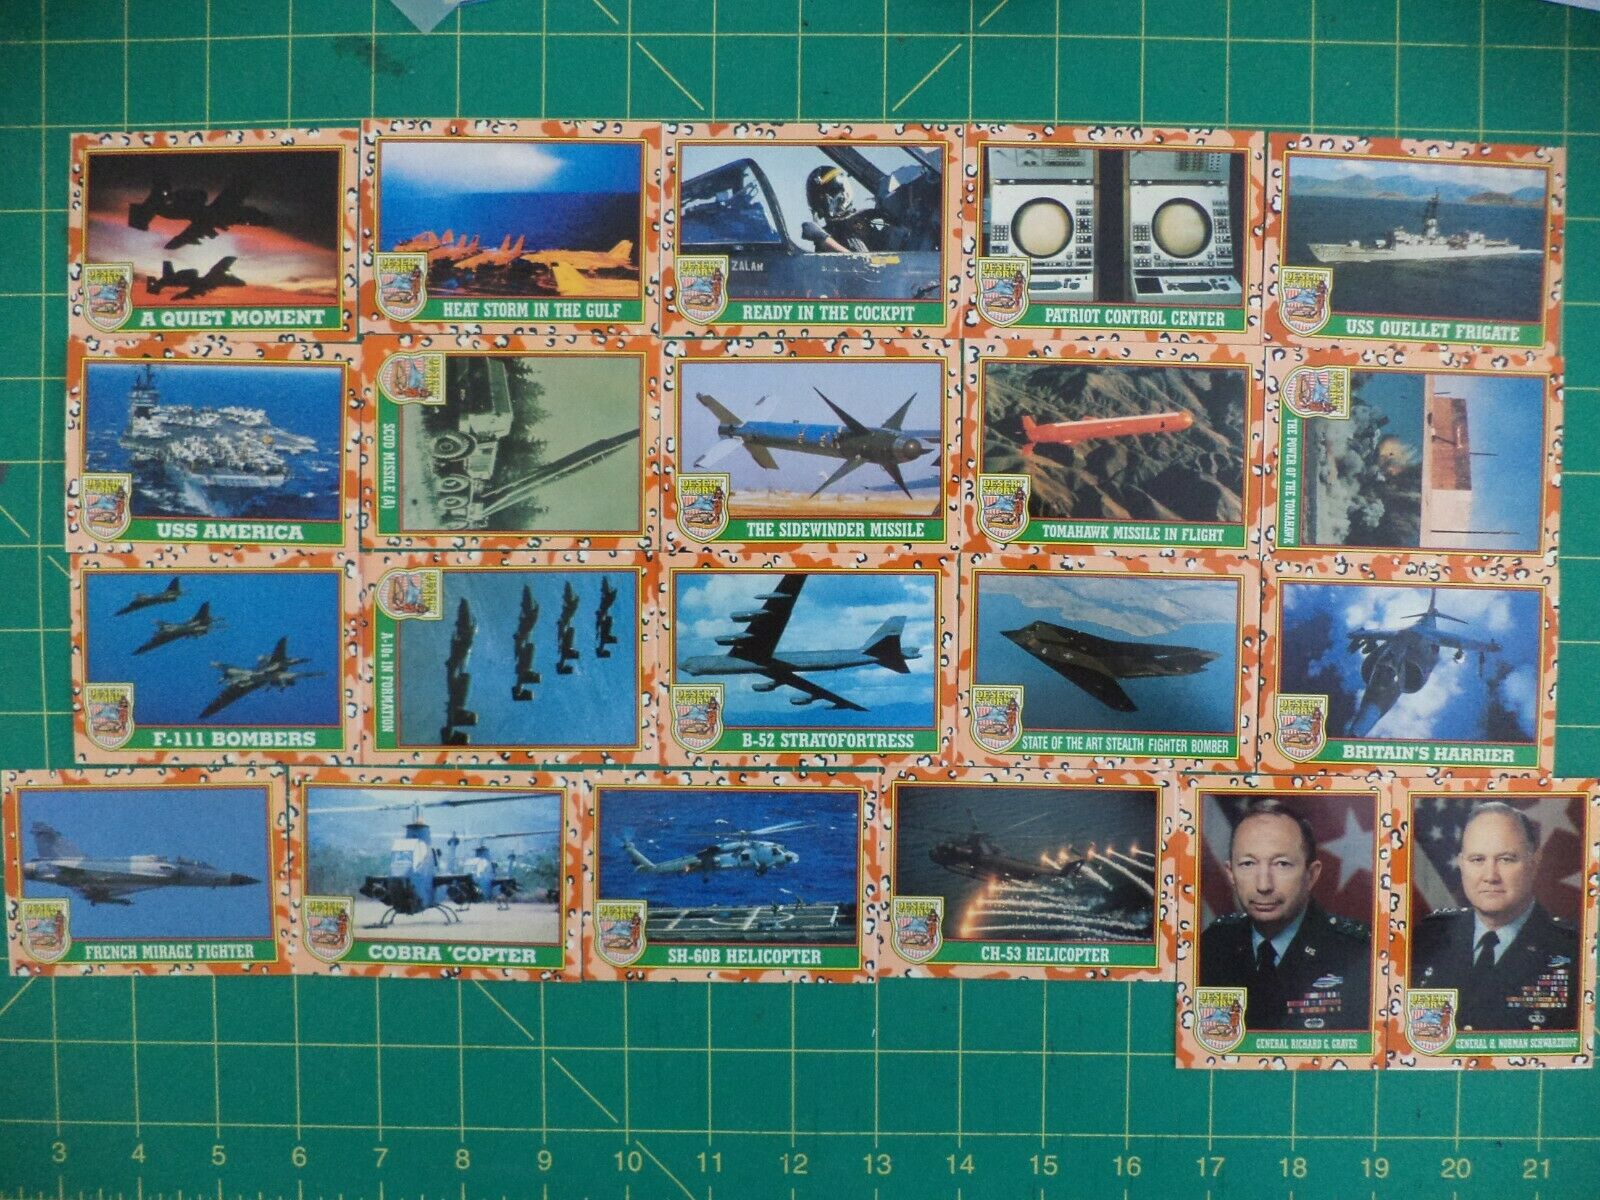 Desert Storm - Topps Trading Cards - 1991 --- Generals, Aircraft, Missiles, Etc.